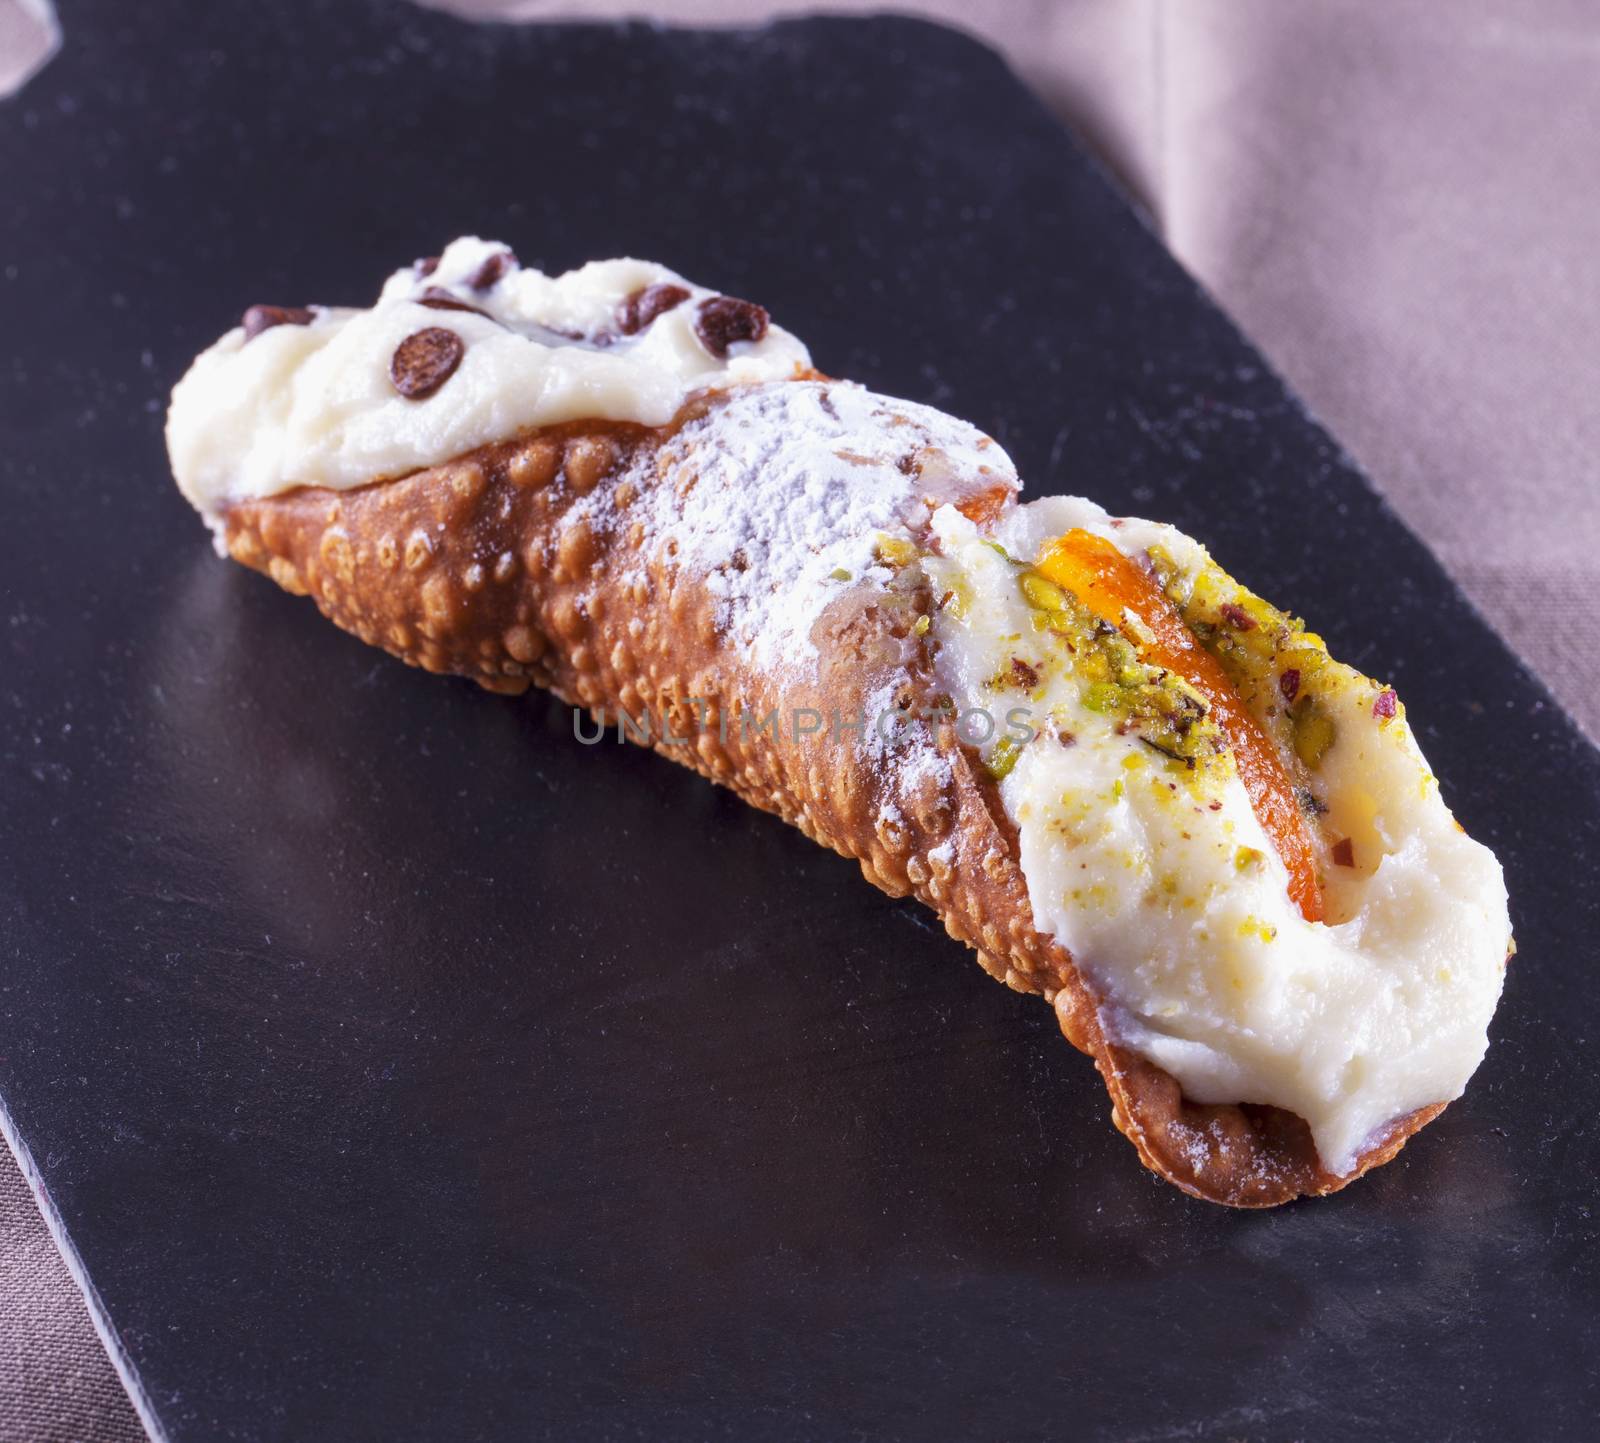 Cannolo by Koufax73